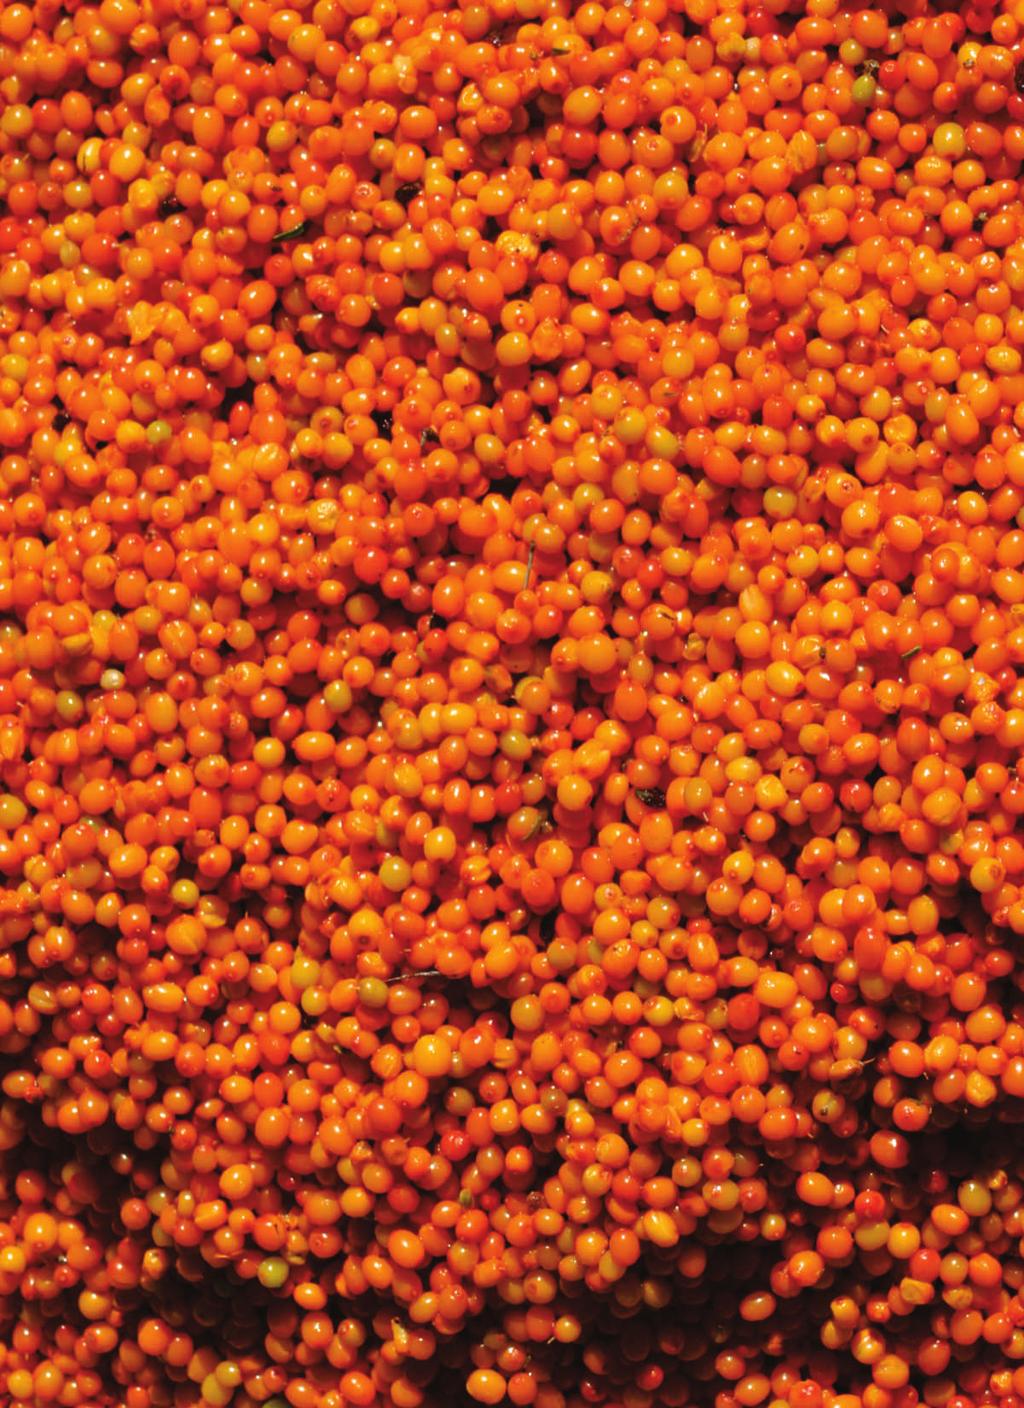 SEA BUCKTHORN CONTAINS ALL 4 ESSENTIAL FATTY ACIDS NAMELY OMEGA 3, 6, 7 & 9 The two primary essential fatty acids are linoleic acid and alpha-linolenic acid.